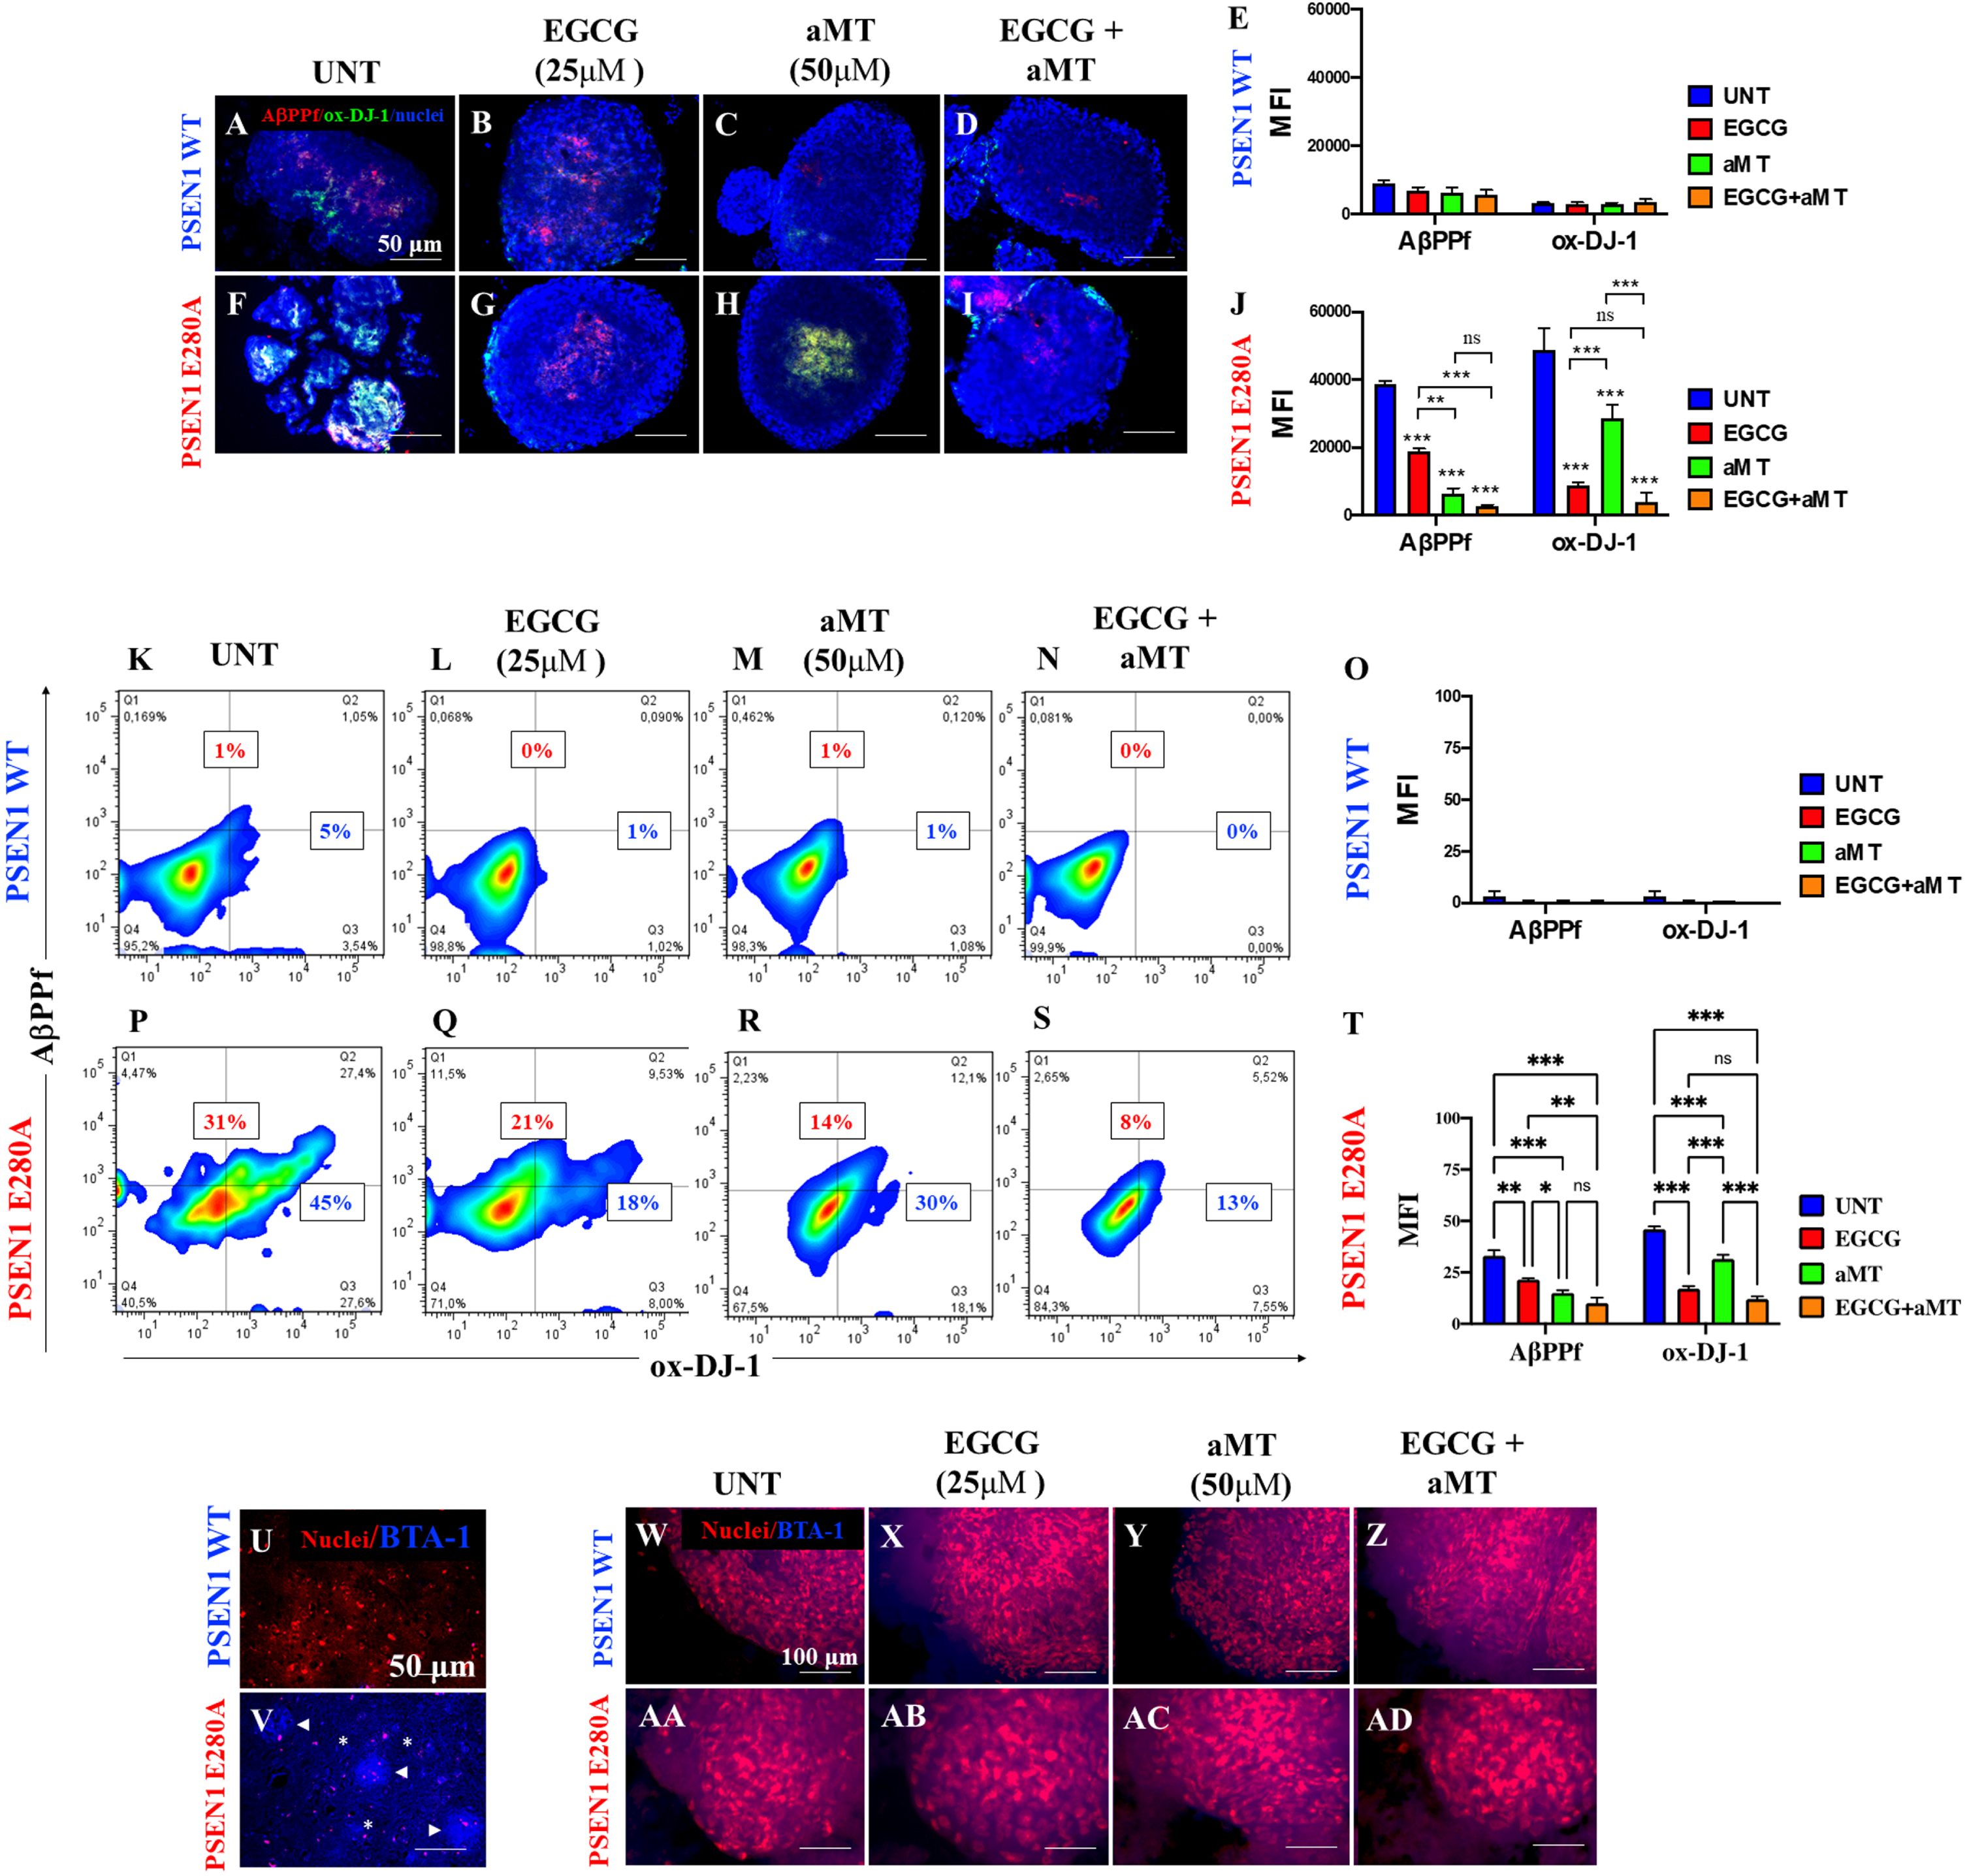 Combined treatment with EGCG and aMT reduce iAβPPf and OS in PSEN1 E280A CSs. The WT PSEN1 and PSEN1 E280A CSs were left without (UNT; A, F) or treated with 25μM EGCG (B, G) and 50μM aMT (C, H) alone or in combination (D, I) for 11 days. CSs were double-stained as indicated in the figure with antibodies against sAβPPf (red) and Ox-DJ-1 (green), and nuclei were stained with Hoechst (blue). E) Mean fluorescence intensity (MFI) quantification of images obtained by immunofluorescence analysis of PSEN1 WT CSs. J) MFI quantification of images obtained by immunofluorescence analysis of PSEN1 E280A CSs. K-N, P-S) Representative 2D density plot showing iAβPPf (y-axis) and ox-DJ-1 (x-axis) flow cytometry double analysis performed on untreated WT (K) and mutant CSs (P), or treated with EGCG only (L, Q), aMT only (M, R), and EGCG/ aMT (N, S). O, T) represent the quantitative analysis of the data from quadrant Q1 + Q2 for iAβPPf and Q2 + Q4 for ox-DJ-1. U-V) represent BTA-1 negative staining of a temporal cortex sample from a healthy individual (case #3648) and BTA-1 positive staining of a temporal cortex sample from a PSEN1 E280A individual (case #3396). Arrowheads show Aβ plaques, and asterisks show Aβ fibrils. W-AD) The WT PSEN1 and PSEN1 E280A CSs were left without (UNT; W, AA) or treated with EGCG (X, AB) and aMT (Y, AC) alone or in combination (Z, AD) for 11 days. Then, CSs were double stained with BTA-1 and propidium iodide as indicated in the figure. BTA-1 negative staining was observed in untreated or treated CSs. Except for Fig. 5U and 5V, 2D histograms and images represent one out of three independent experiments. Statistical significance was determined by one-way ANOVA with a Tukey post hoc test; ***p < 0.001. Image magnification 10x.